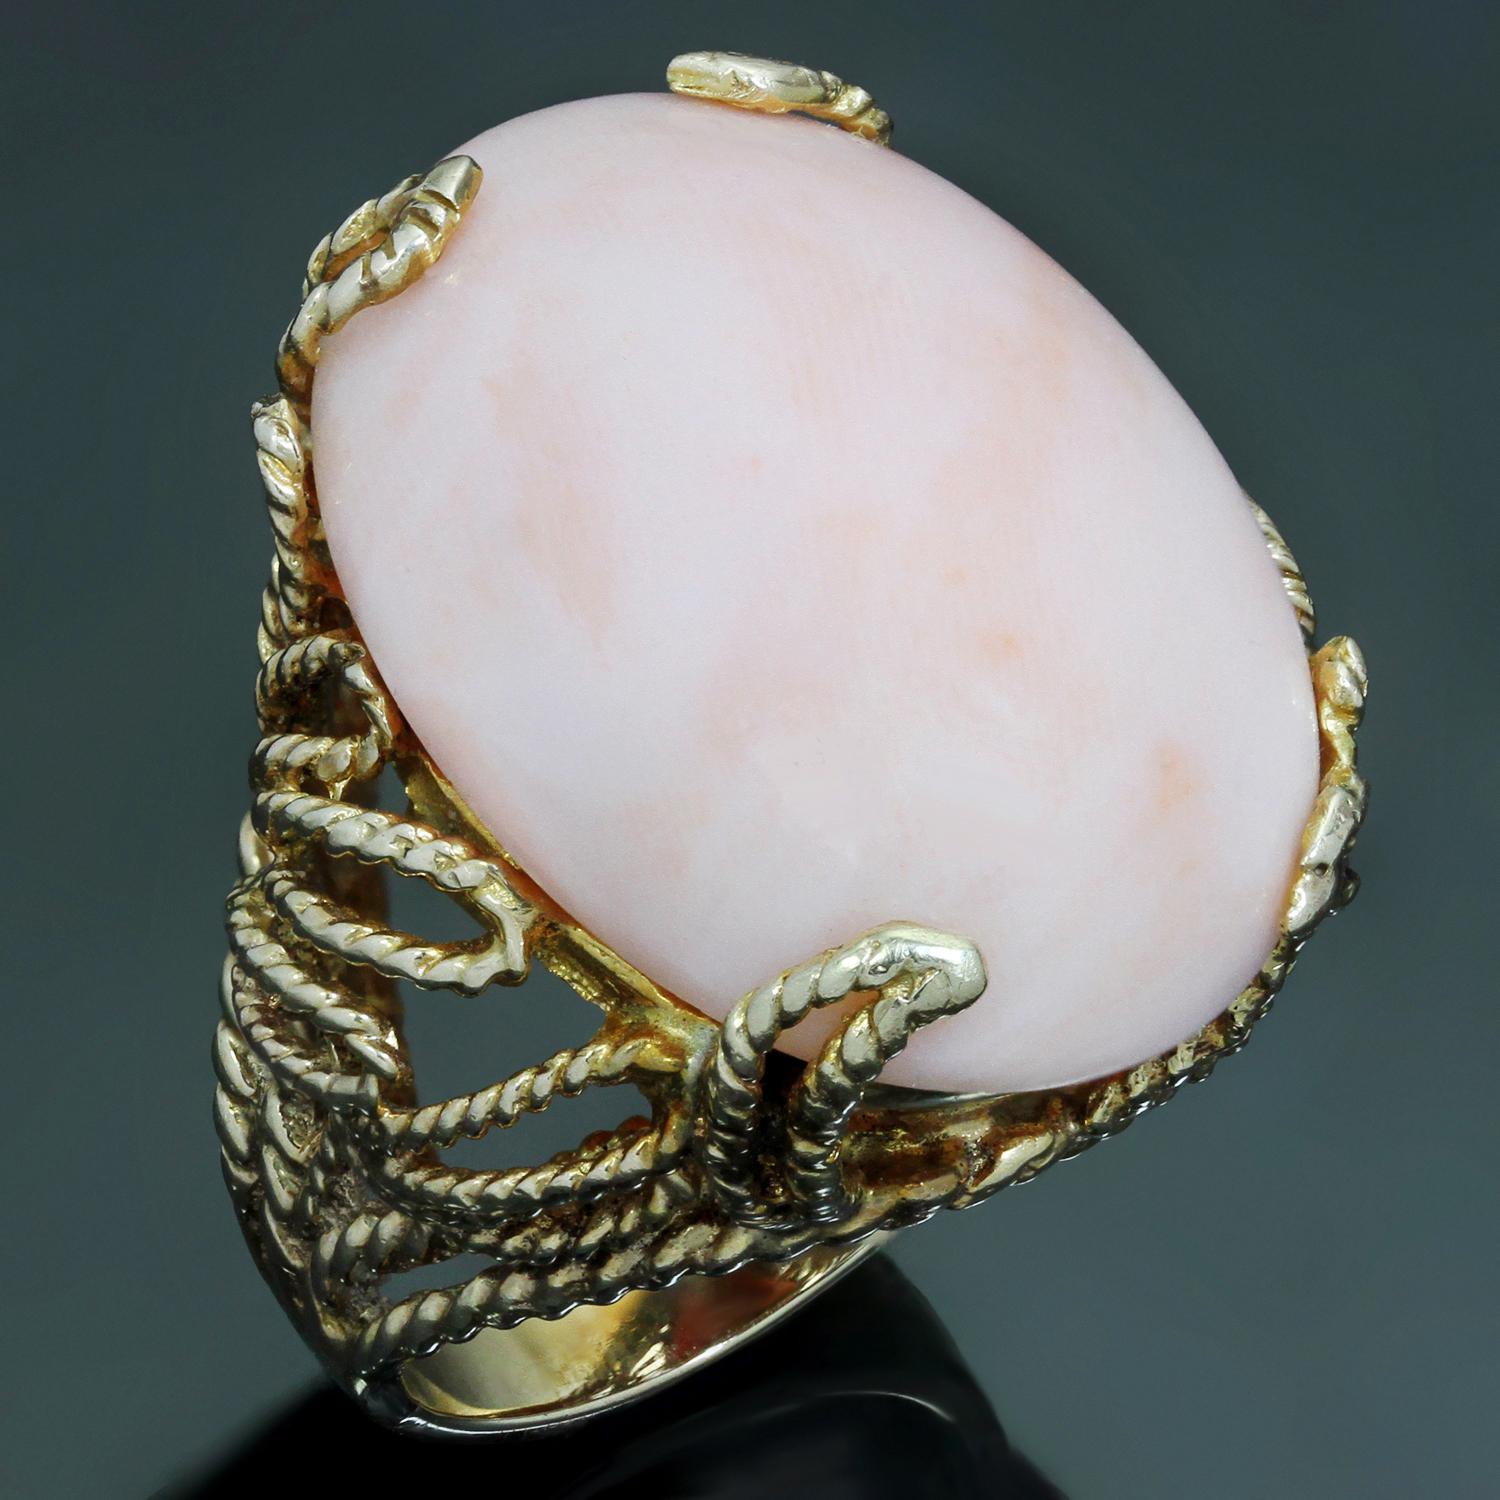 This classic retro vintage ring is hand-crafted in 14k yellow gold and set with a natural angel skin pink coral measuring 21.0mm x 29.0mm. Made in United States circa 1960s. Measurements: 1.06